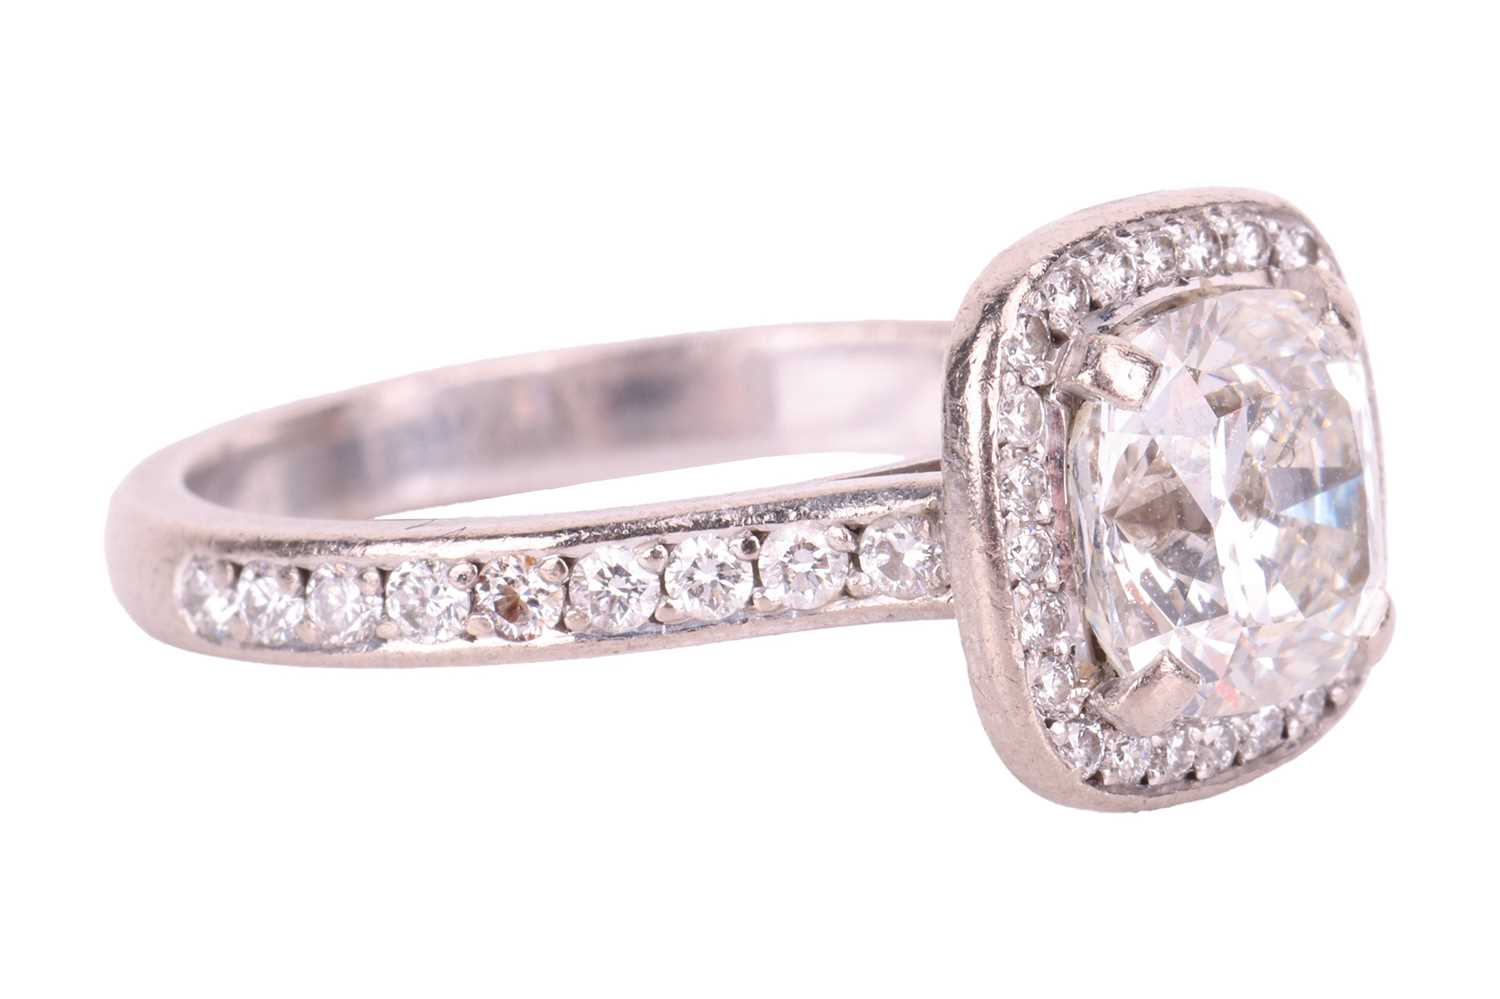 Theo Fennell - a diamond halo ring in 18ct white gold, centred with a cushion-cut diamond - Image 3 of 5